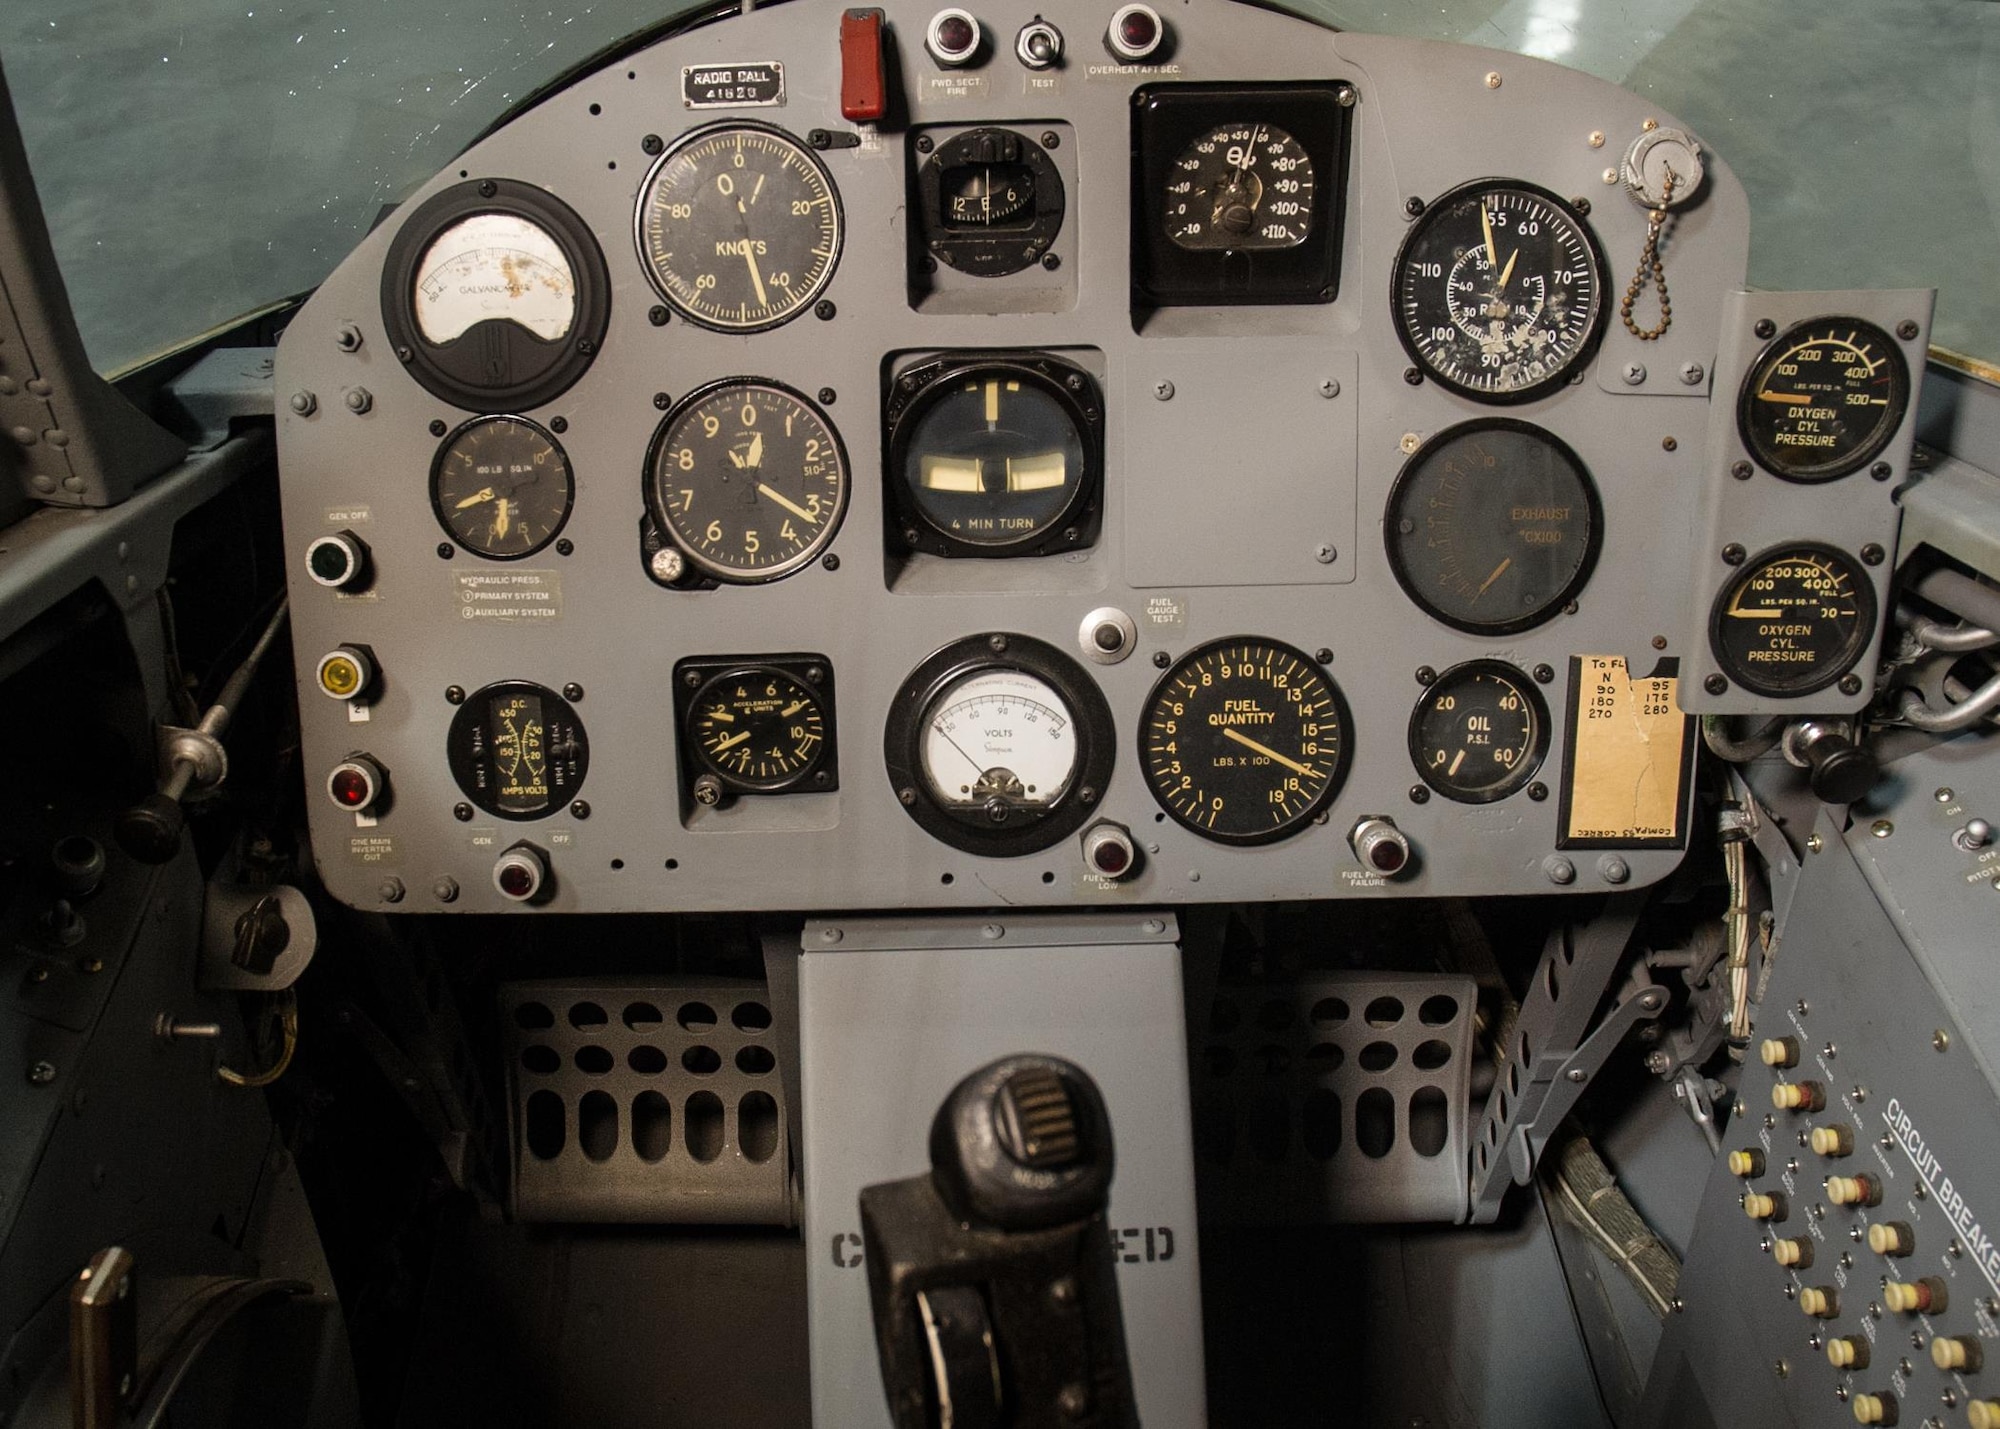 DAYTON, Ohio - Ryan X-13 Vertijet cockpit at the National Museum of the U.S. Air Force. (U.S. Air Force photo)
